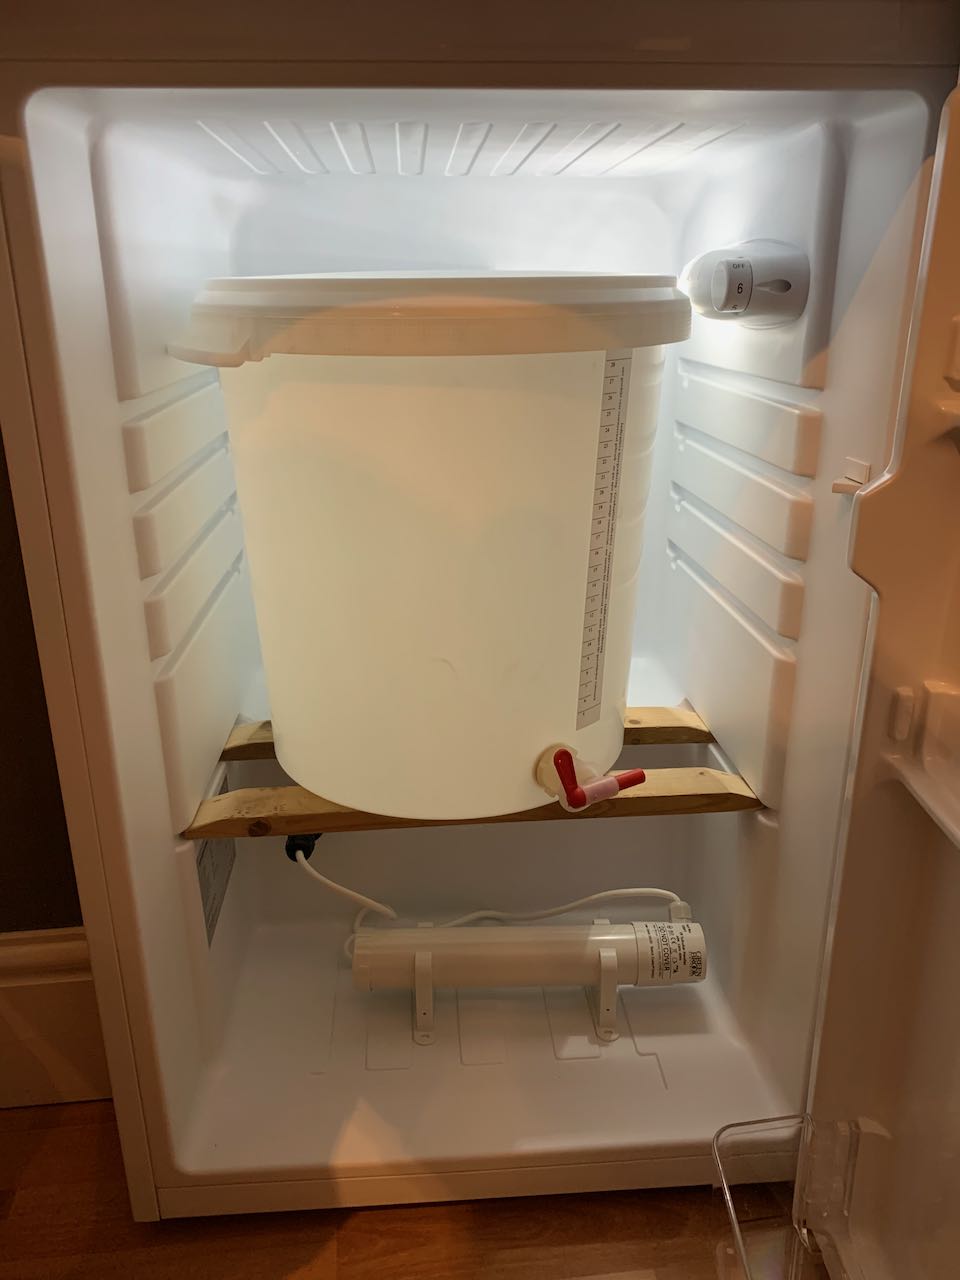 A modified fridge, showing the fermentation bucket fitting well